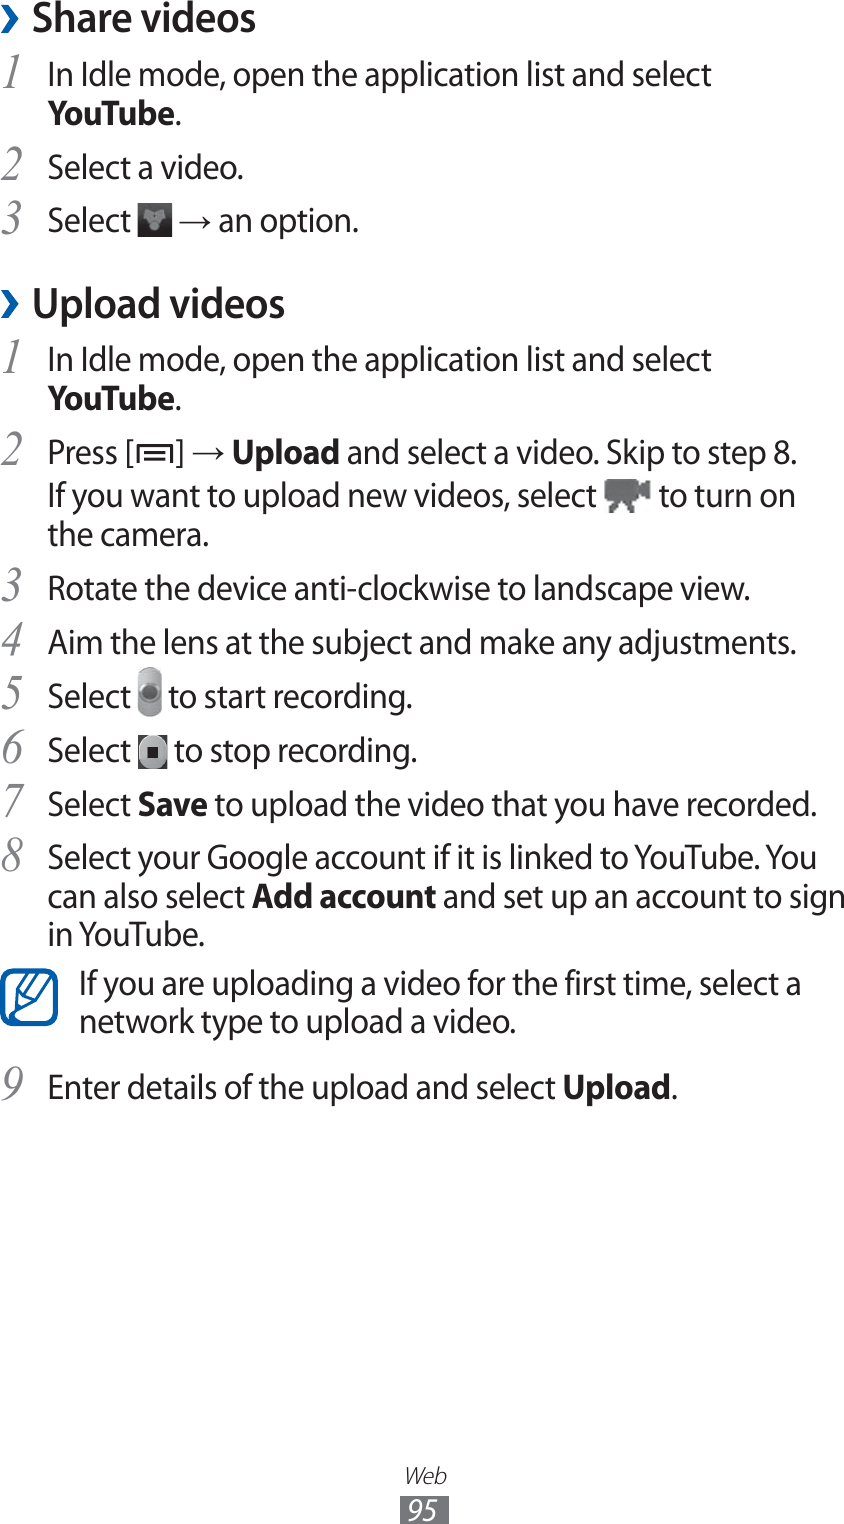 Web95Share videos ›In Idle mode, open the application list and select 1 YouTube.Select a video.2 Select 3  → an option.Upload videos ›In Idle mode, open the application list and select 1 YouTube.Press [2 ] → Upload and select a video. Skip to step 8.If you want to upload new videos, select   to turn on the camera.Rotate the device anti-clockwise to landscape view.3 Aim the lens at the subject and make any adjustments.4 Select 5  to start recording.Select 6  to stop recording.Select 7 Save to upload the video that you have recorded.Select your Google account if it is linked to YouTube. You 8 can also select Add account and set up an account to sign in YouTube.If you are uploading a video for the first time, select a network type to upload a video.Enter details of the upload and select 9 Upload.